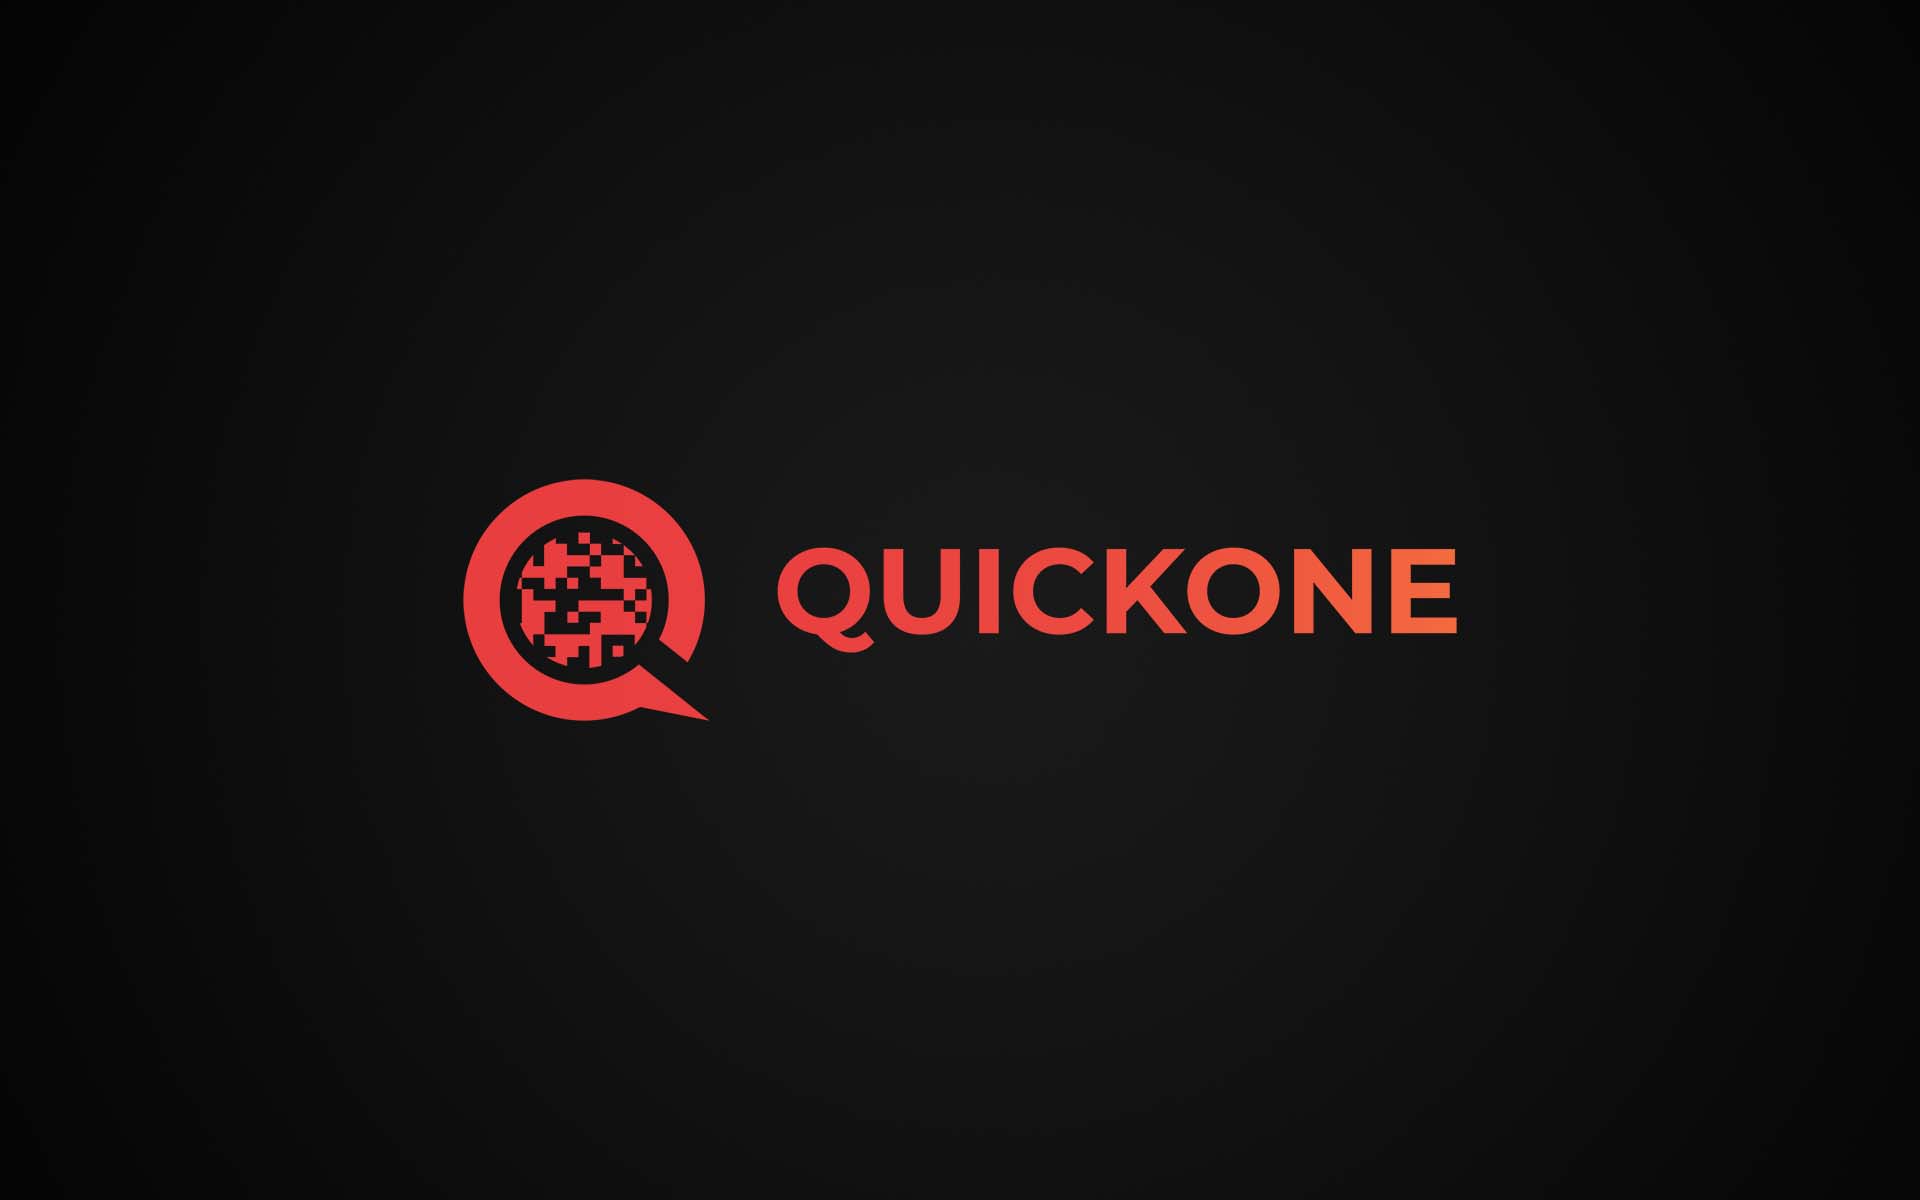 Quick One Launches ICO Based on Newly Developed QR Code Technology That May Become the Future of Ultra Secure Information Sharing, Identification & Easy Online Payments